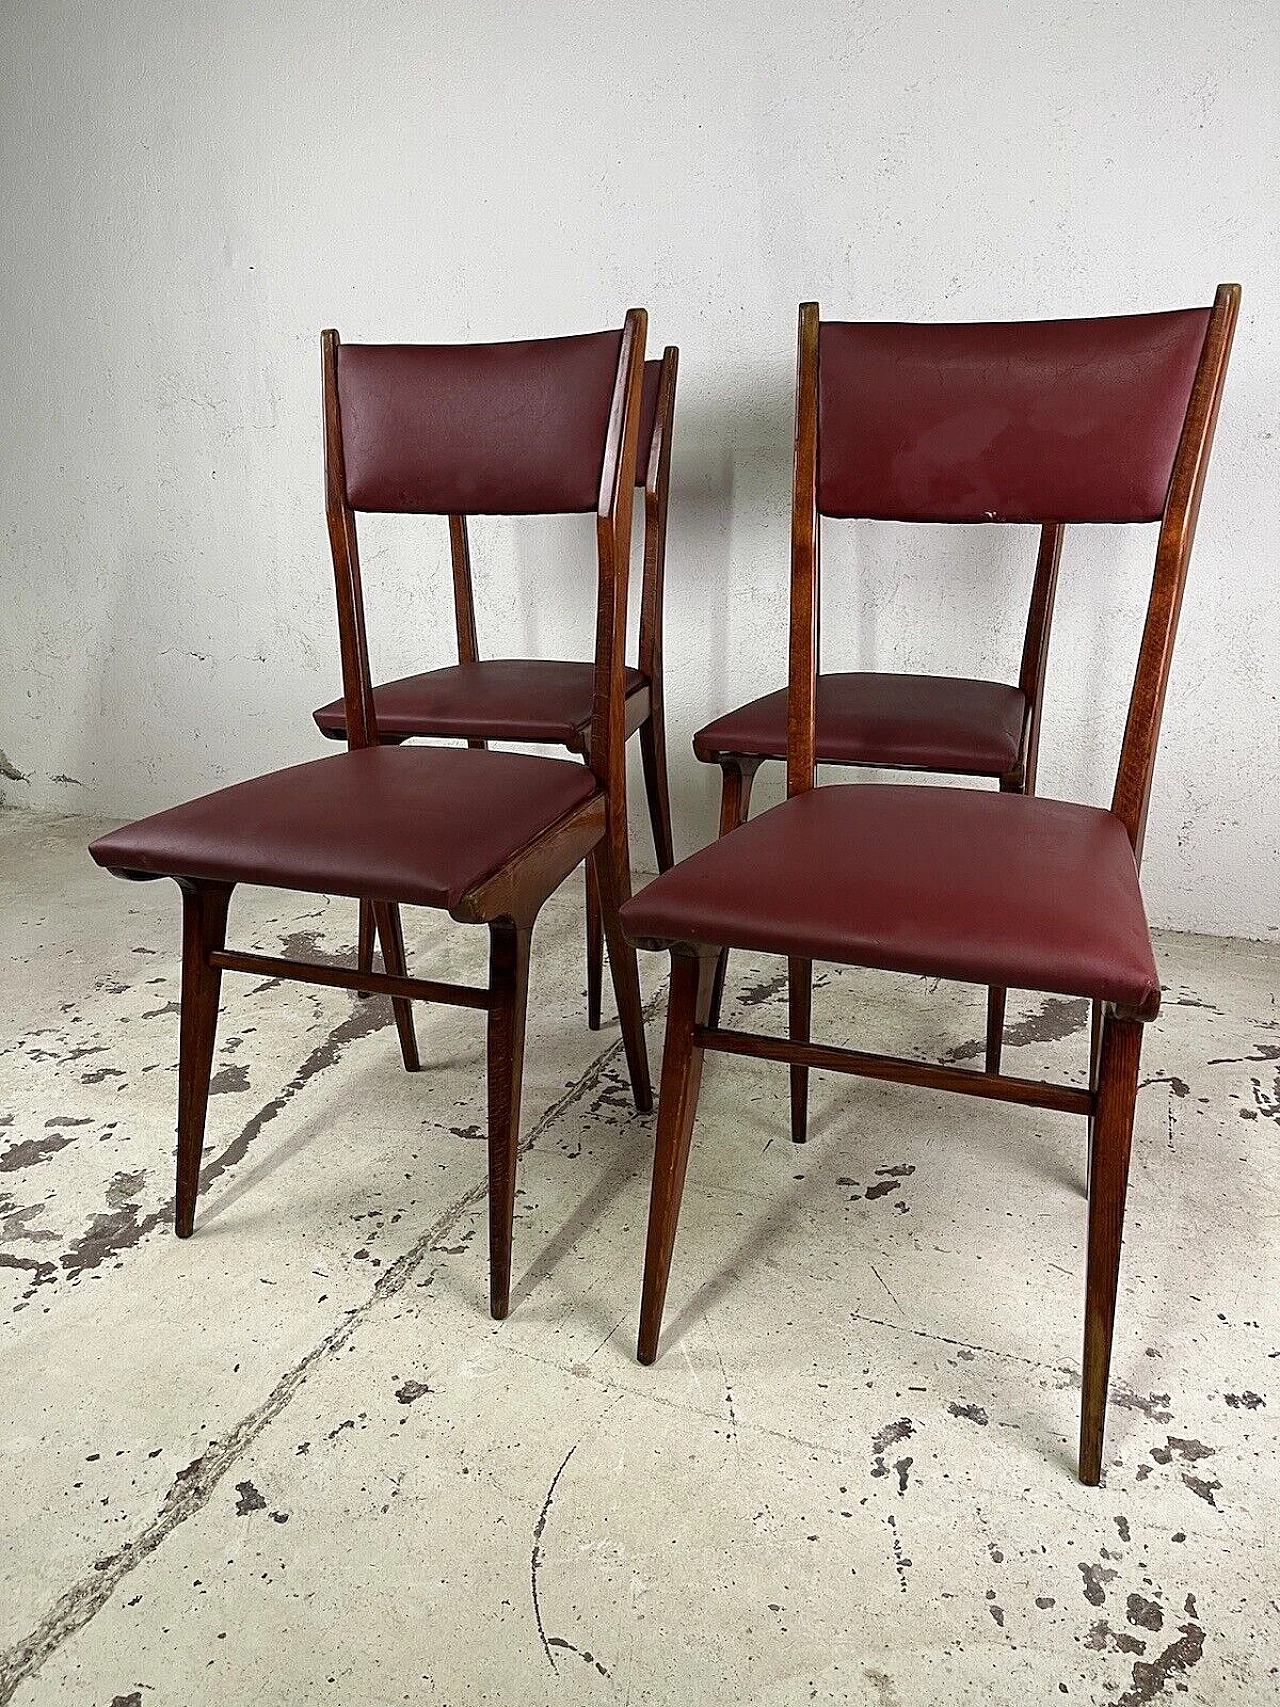 4 Chairs in wood and burgundy leatherette, 1950s 4